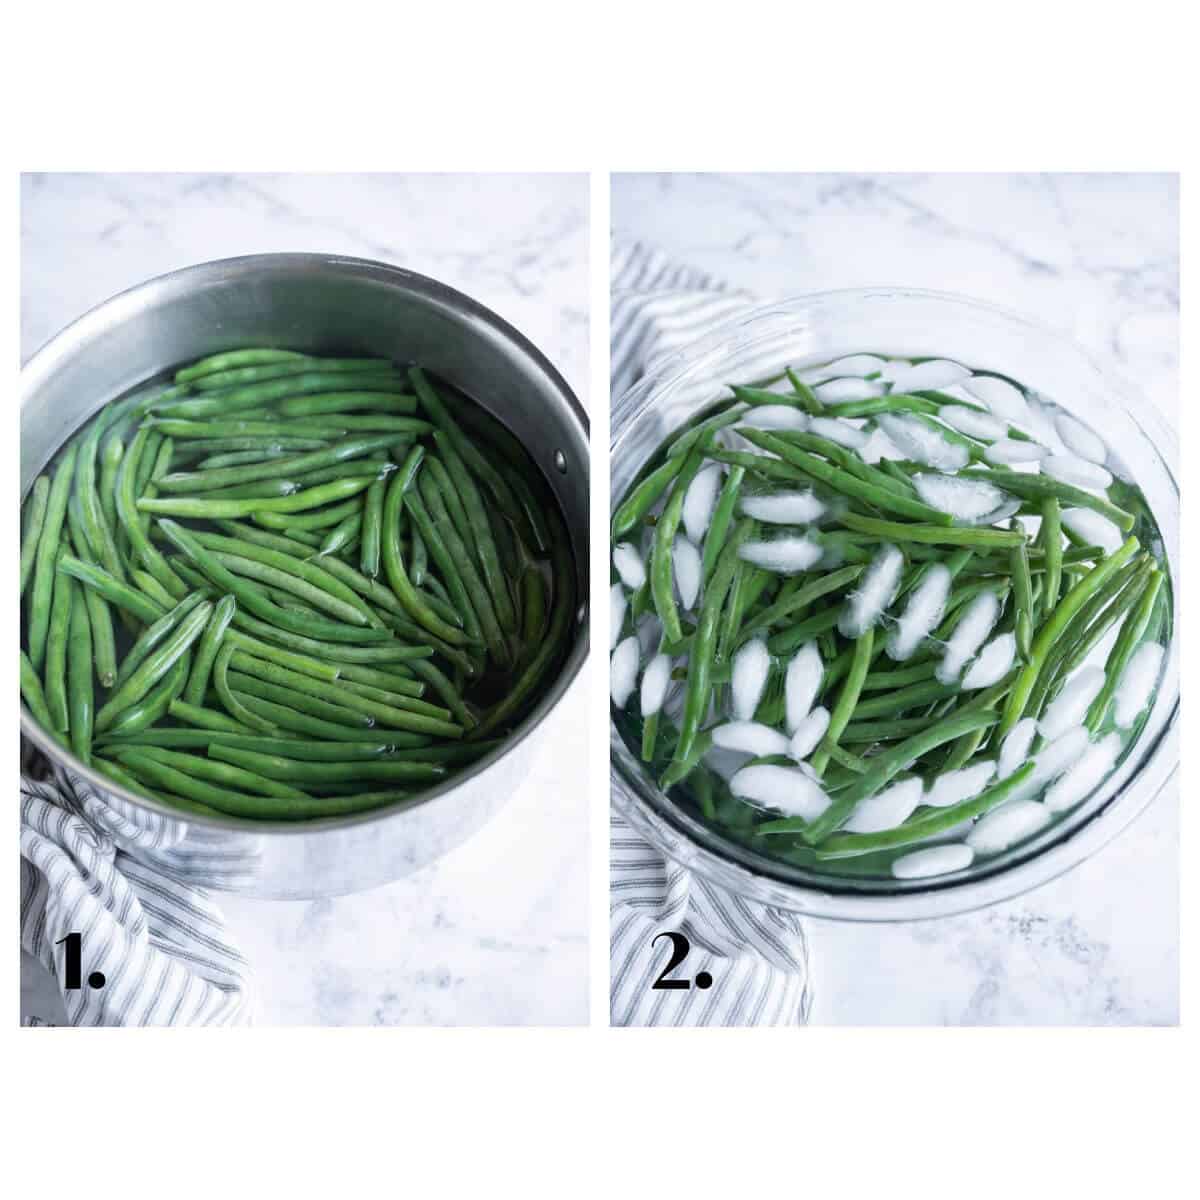 Two picture collage showing how to blanch green beans; step one boil, step two ice bath.